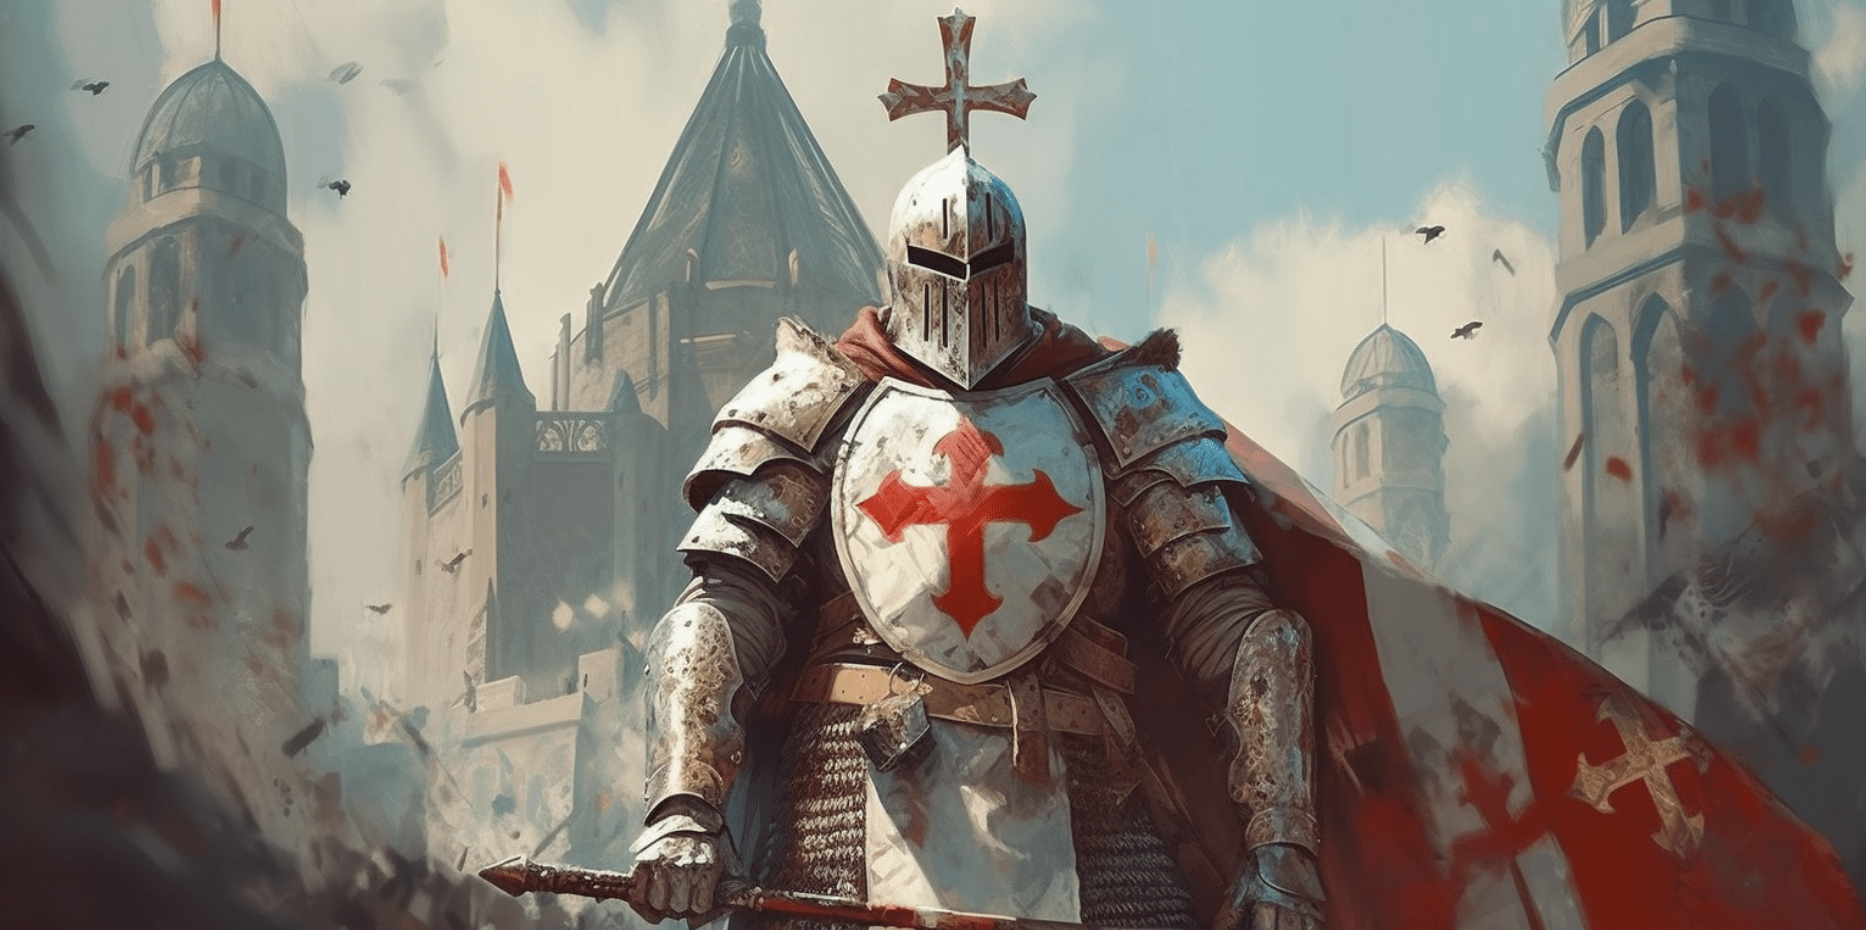 Jacques de Molay, last Grand Master of the Knights Templar, was